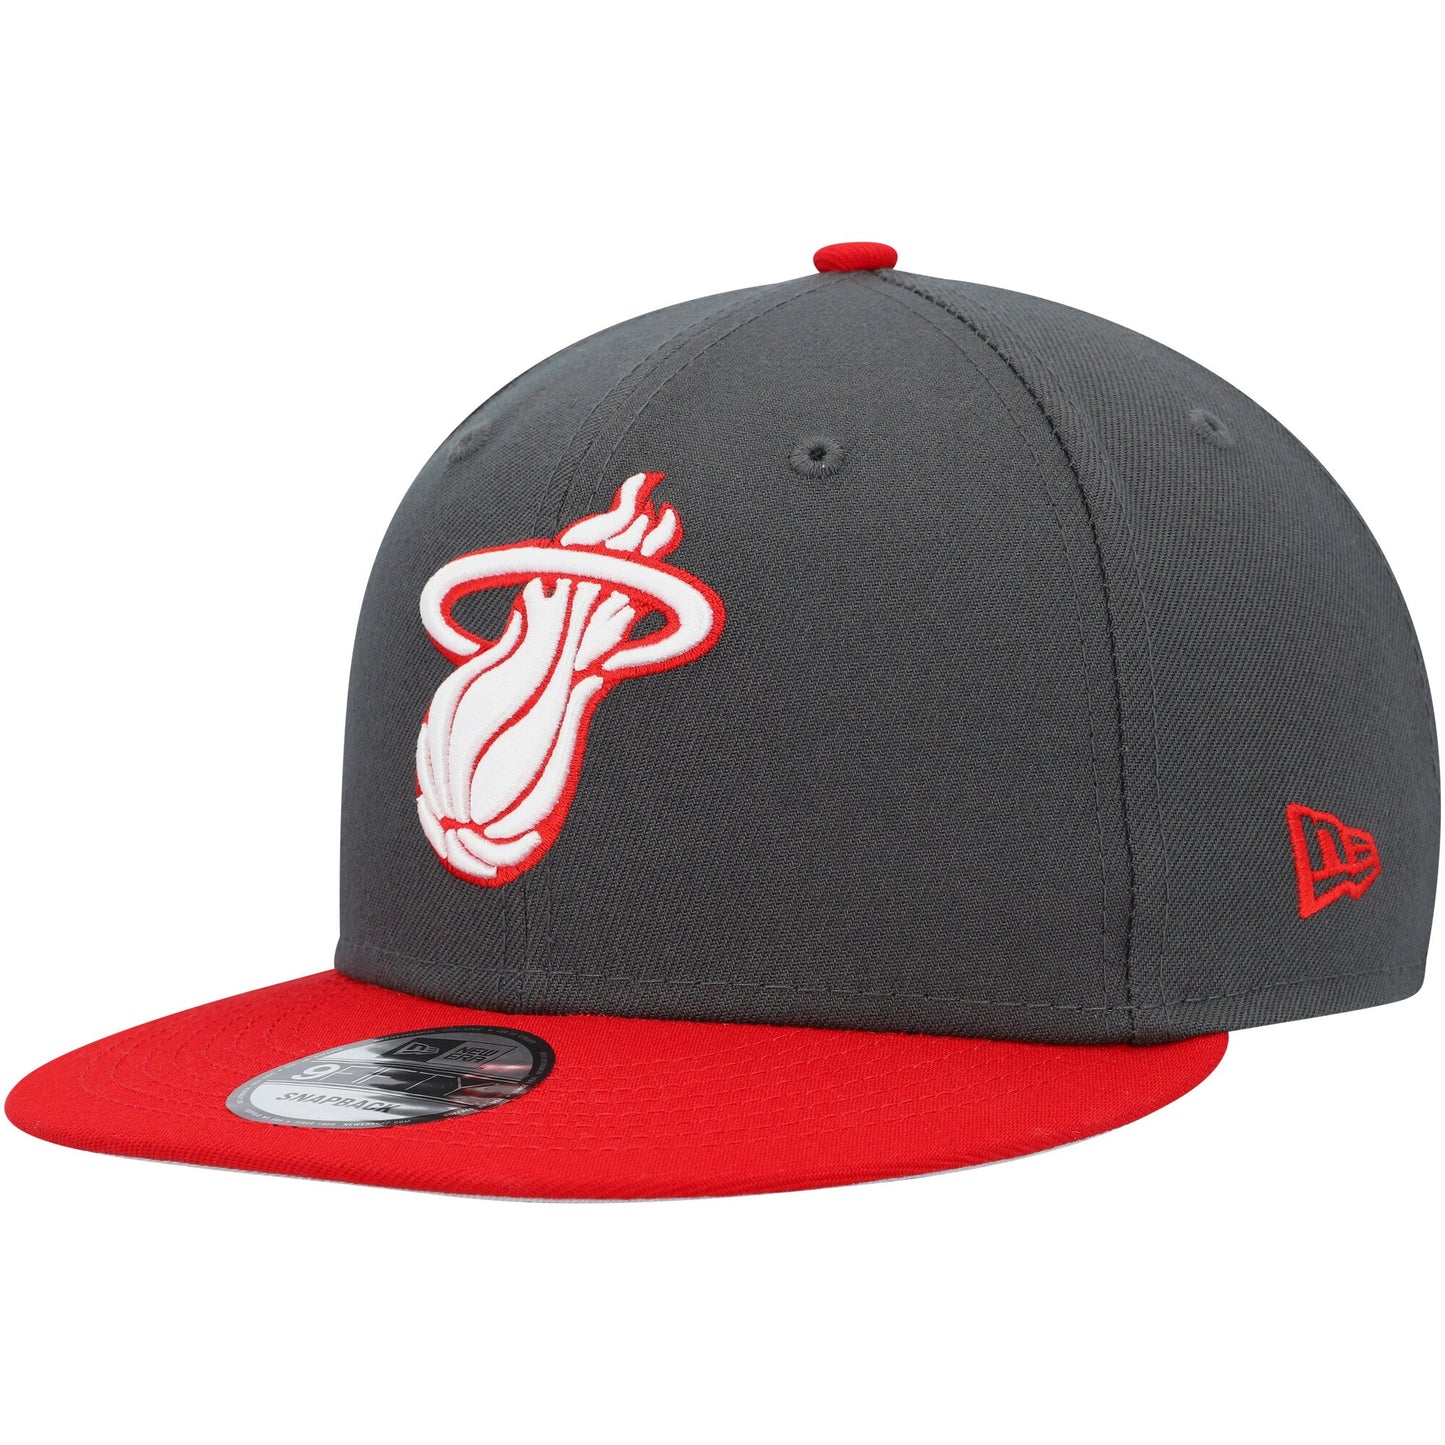 Miami Heat New Era Two-Tone Color Pack 9FIFTY Snapback Hat - Charcoal/Scarlet